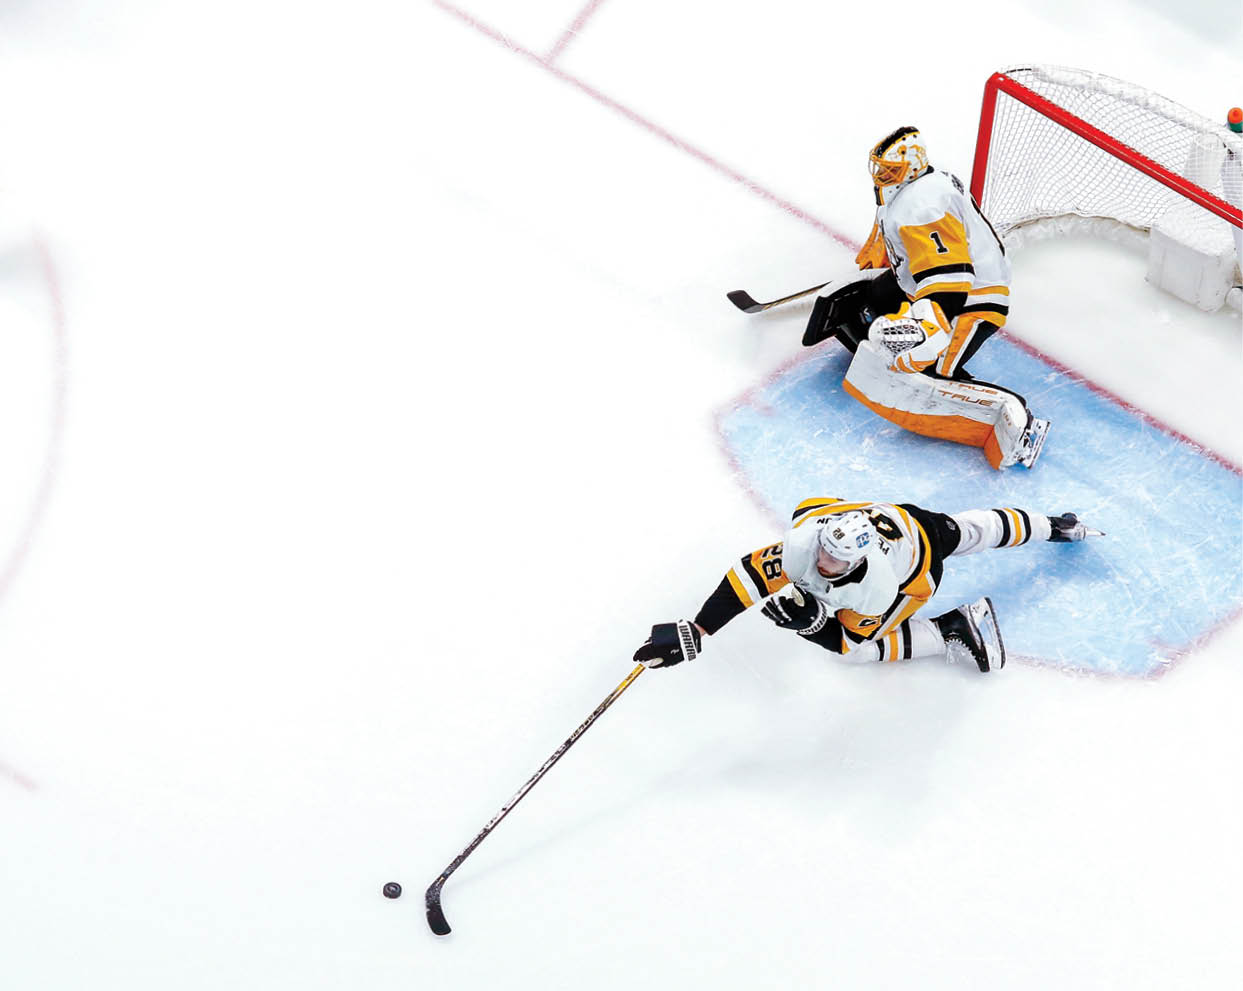 COLUMBUS, OH - FEBRUARY 27:  Marcus Pettersson #28 of the Pittsburgh Penguins knocks away a loose puck during the second period of the game against the Columbus Blue Jackets at Nationwide Arena on February 27, 2022 in Columbus, Ohio  Pittsburgh defeated Columbus 3-2  (Photo by Kirk Irwin Getty Images)